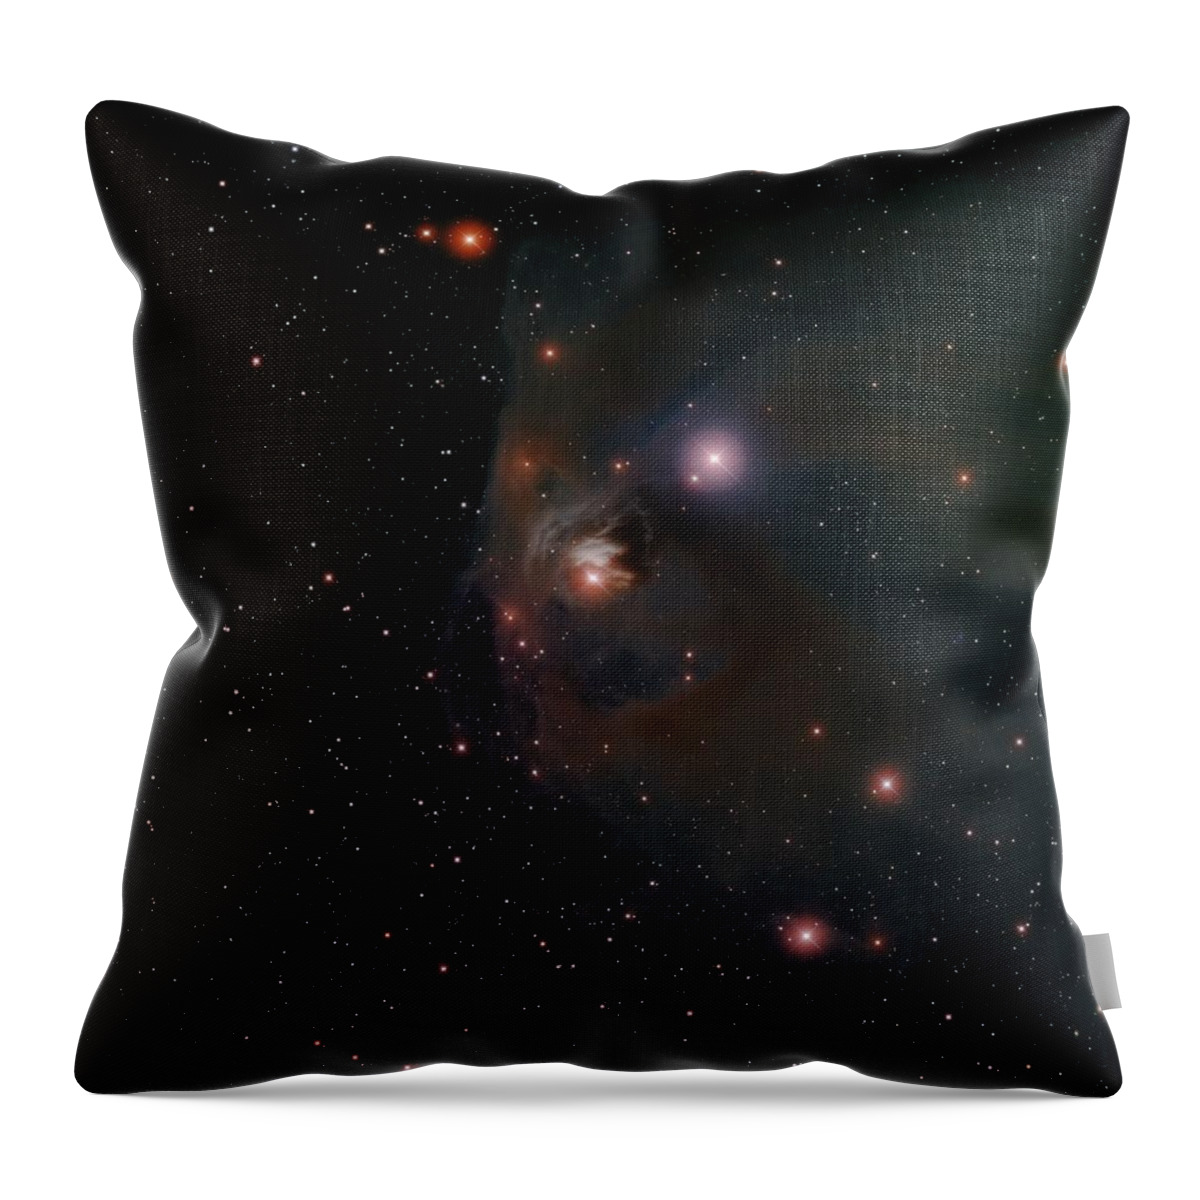 M33 Spiral Galaxy Throw Pillow featuring the photograph Variable Star T Tauri by Celestial Images